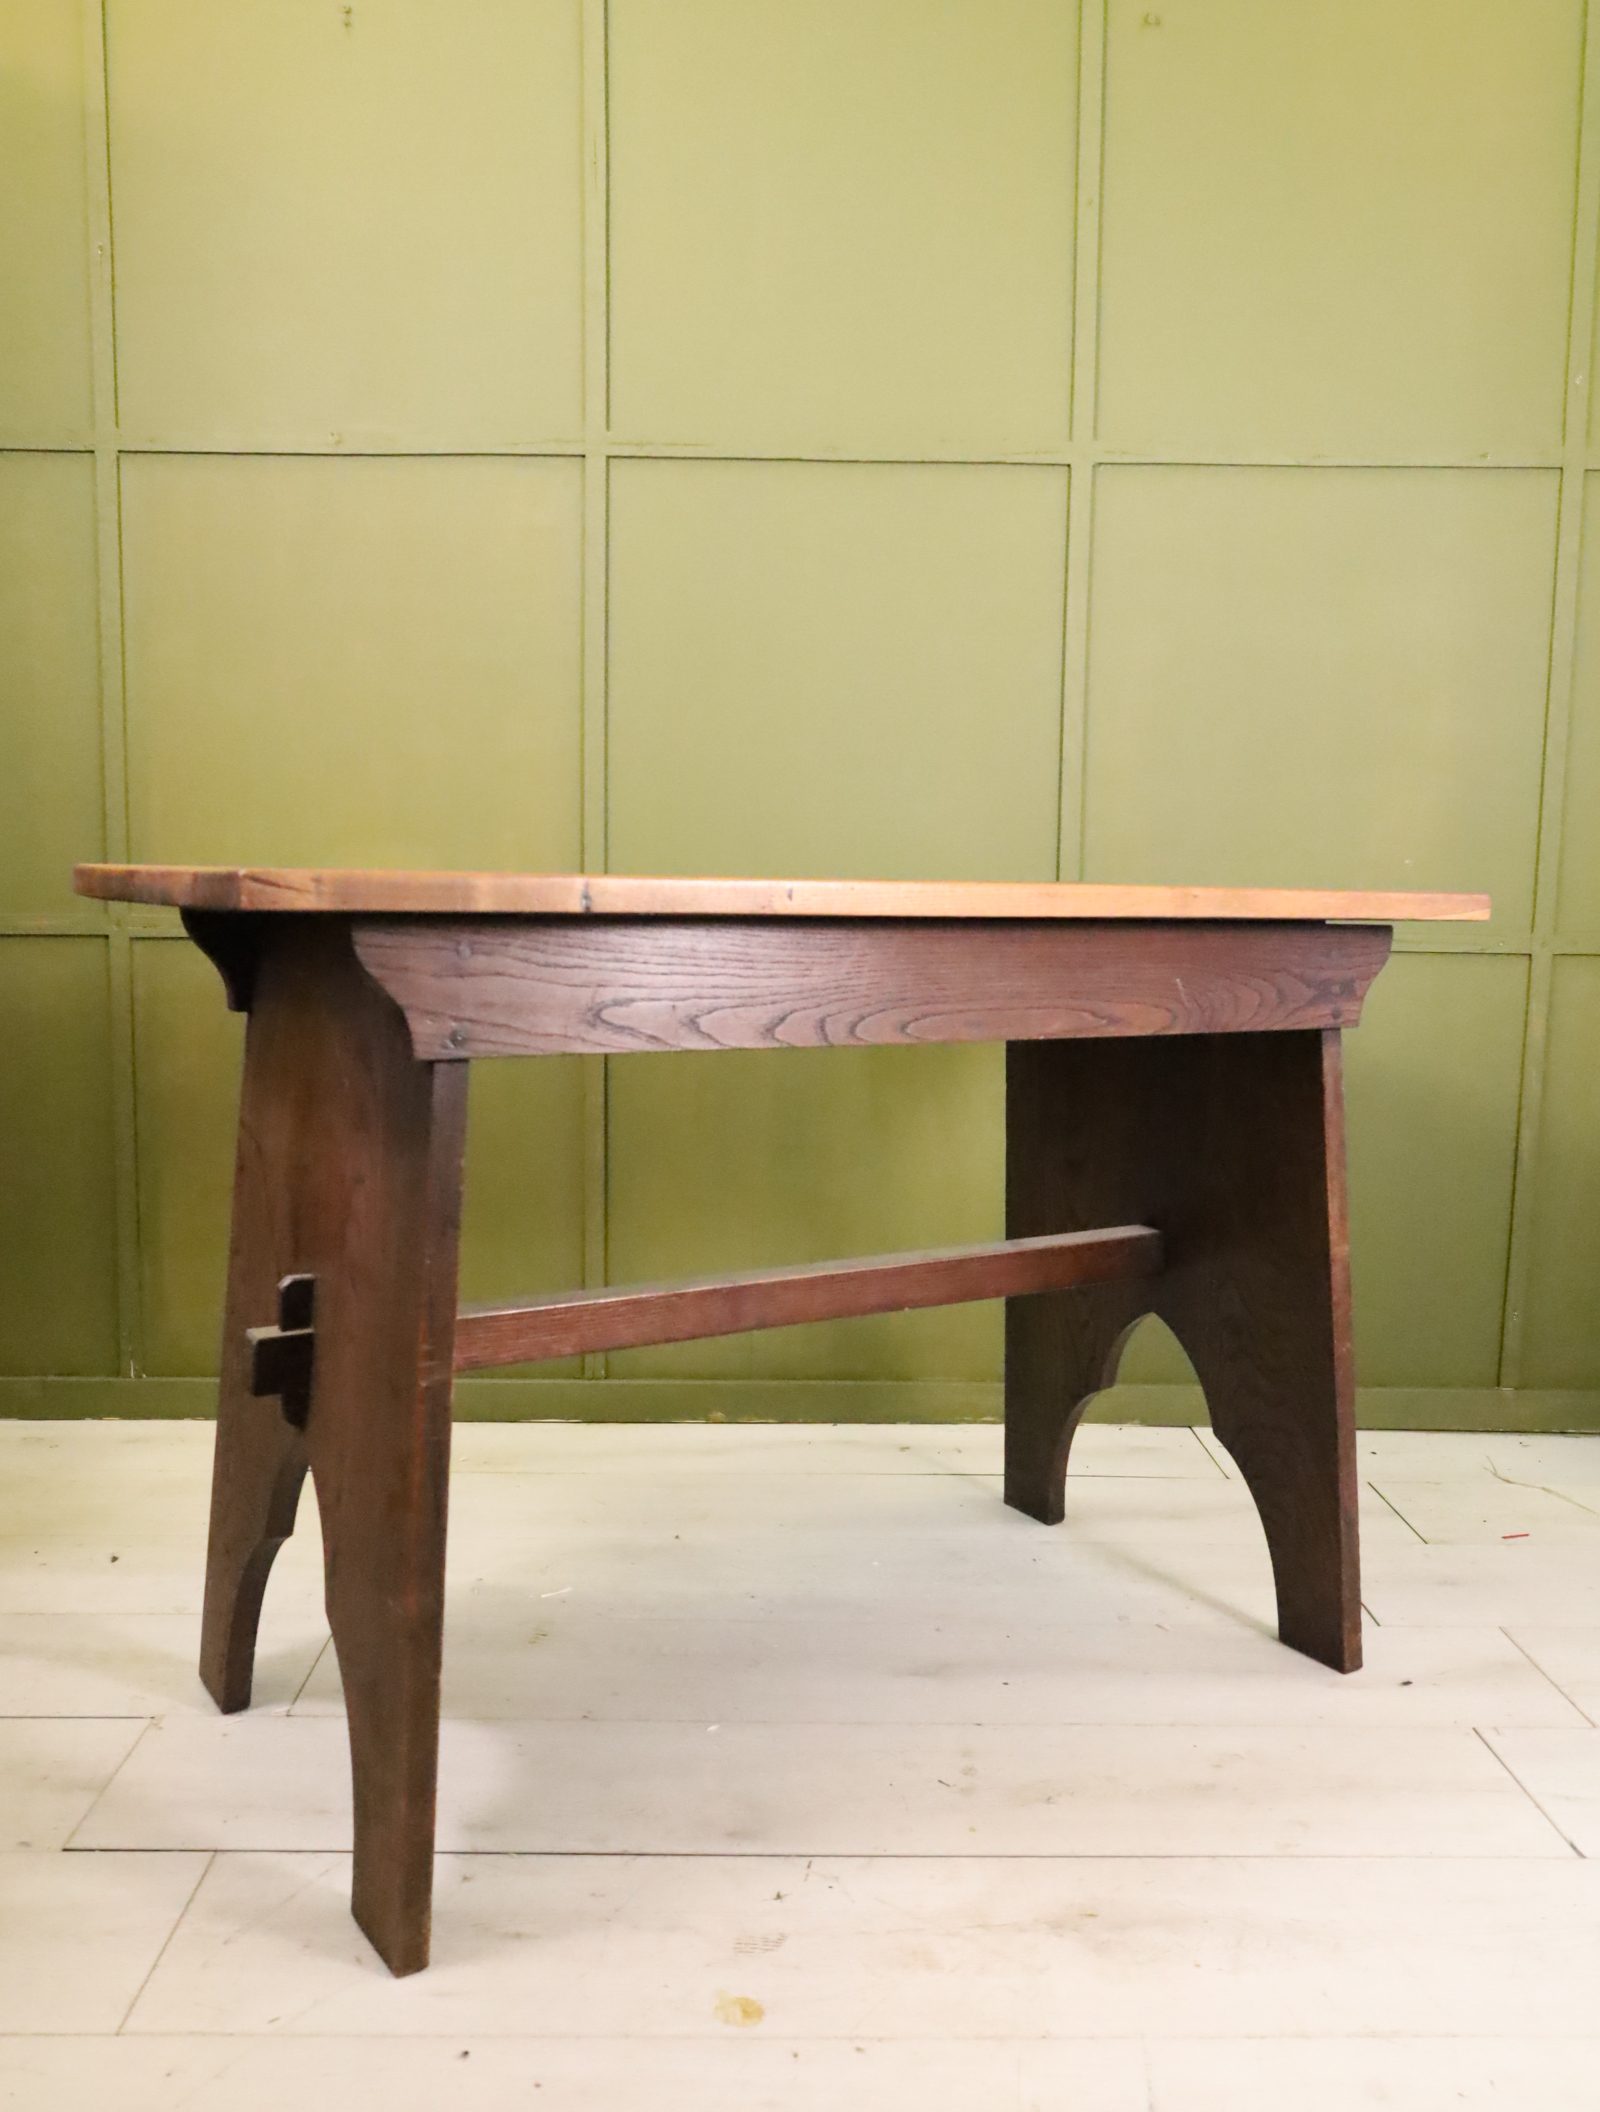 Antique "Centre Table" or Dining Table - Late 19th Century